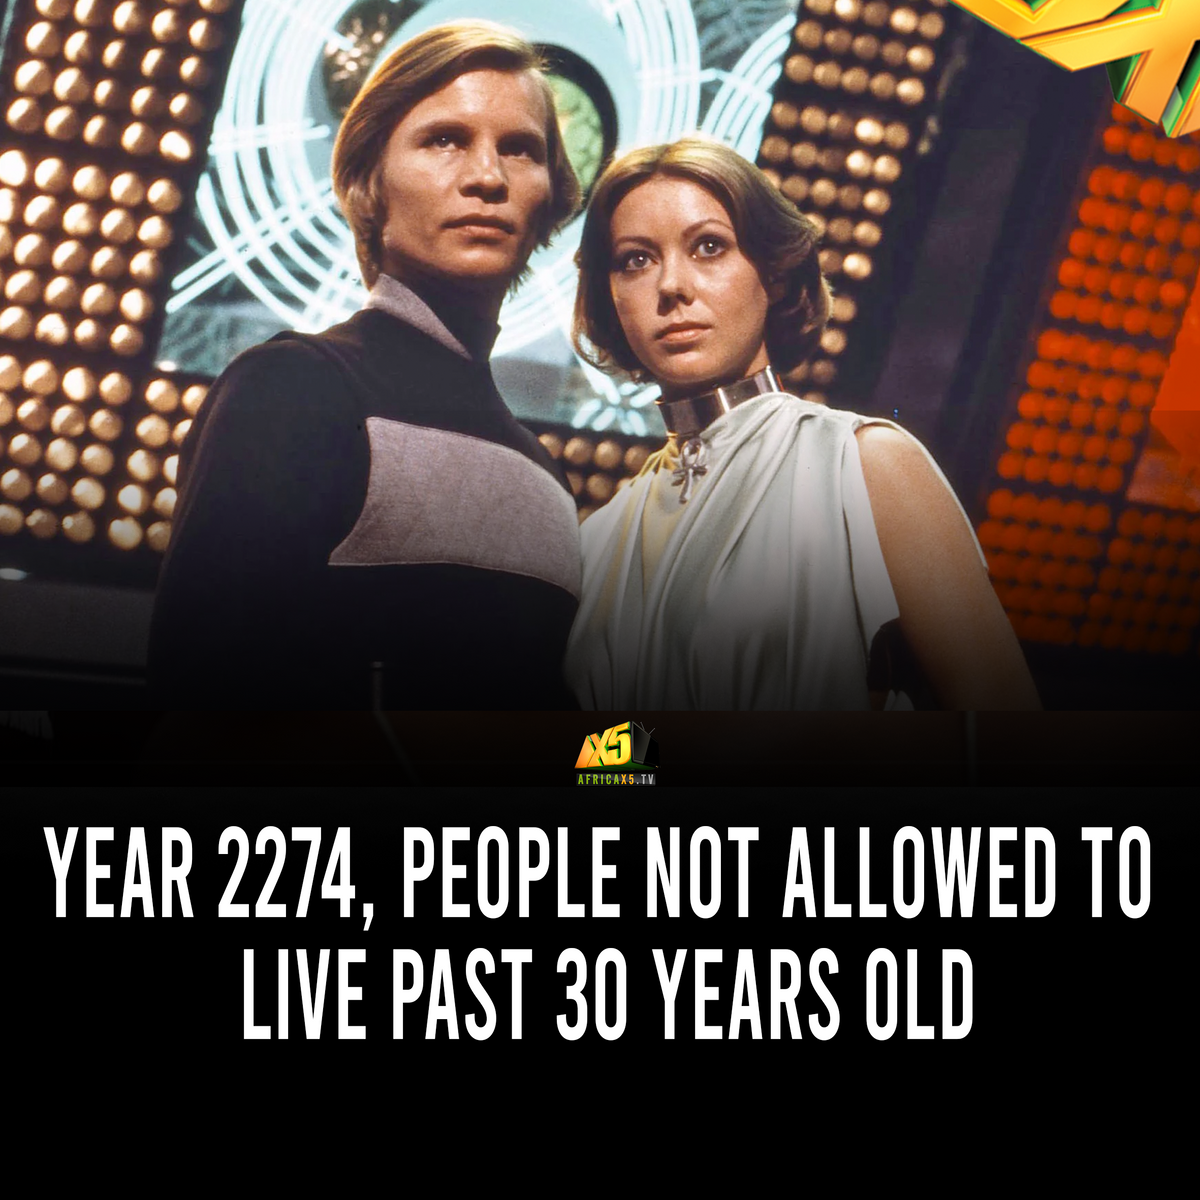 INSTAGRAM POST - Year 2274, People Not Allowed To Live Past 30 Years Old